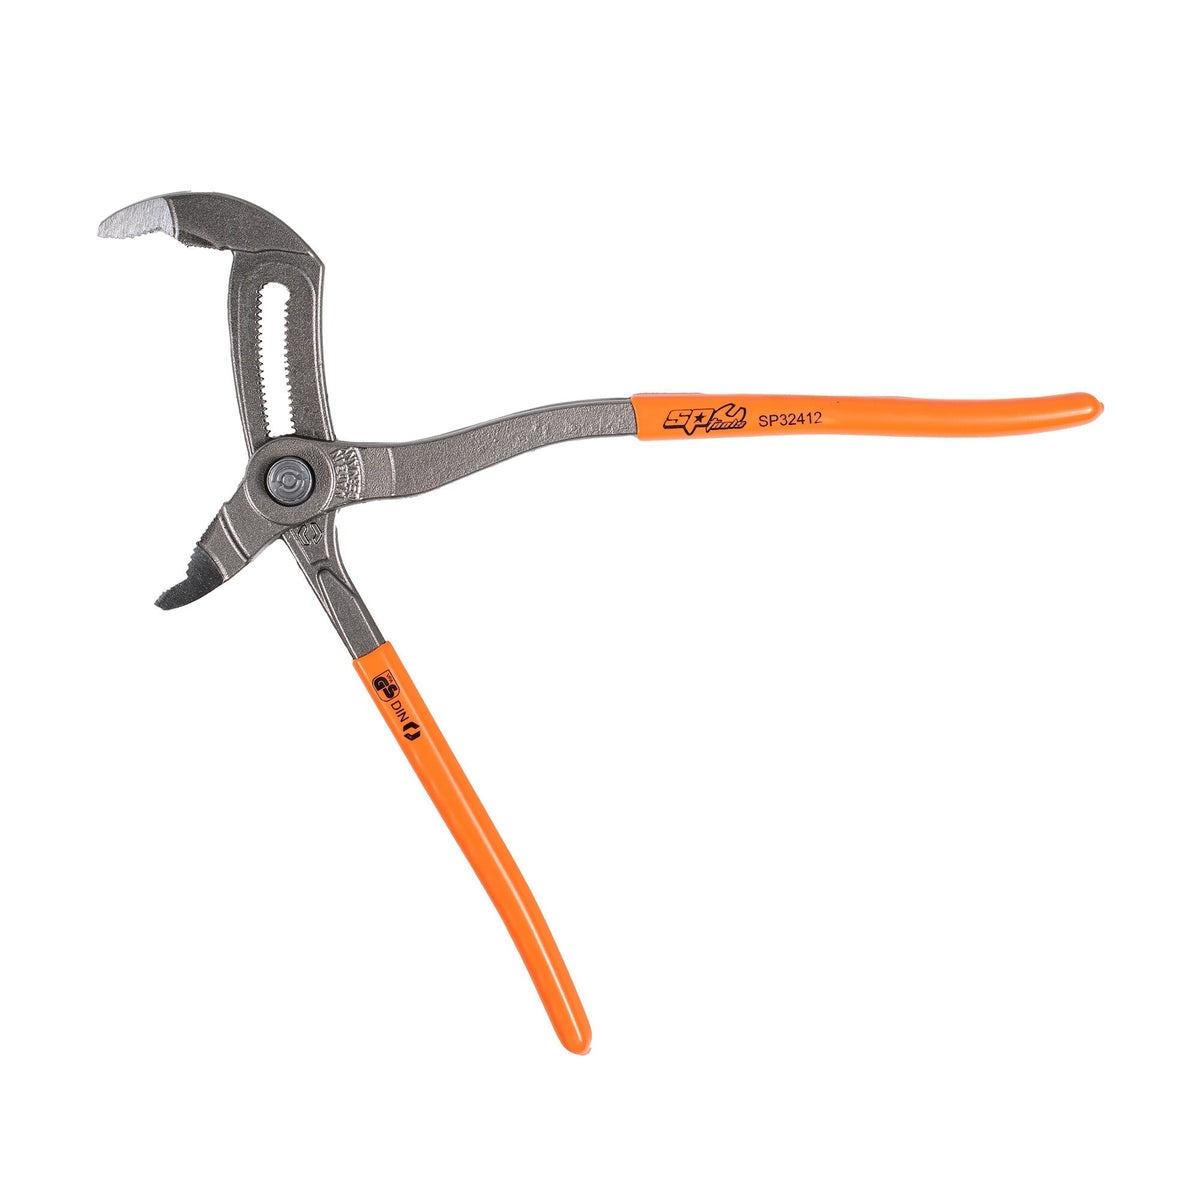 SP Quick-snap Water Pump Pliers with push button